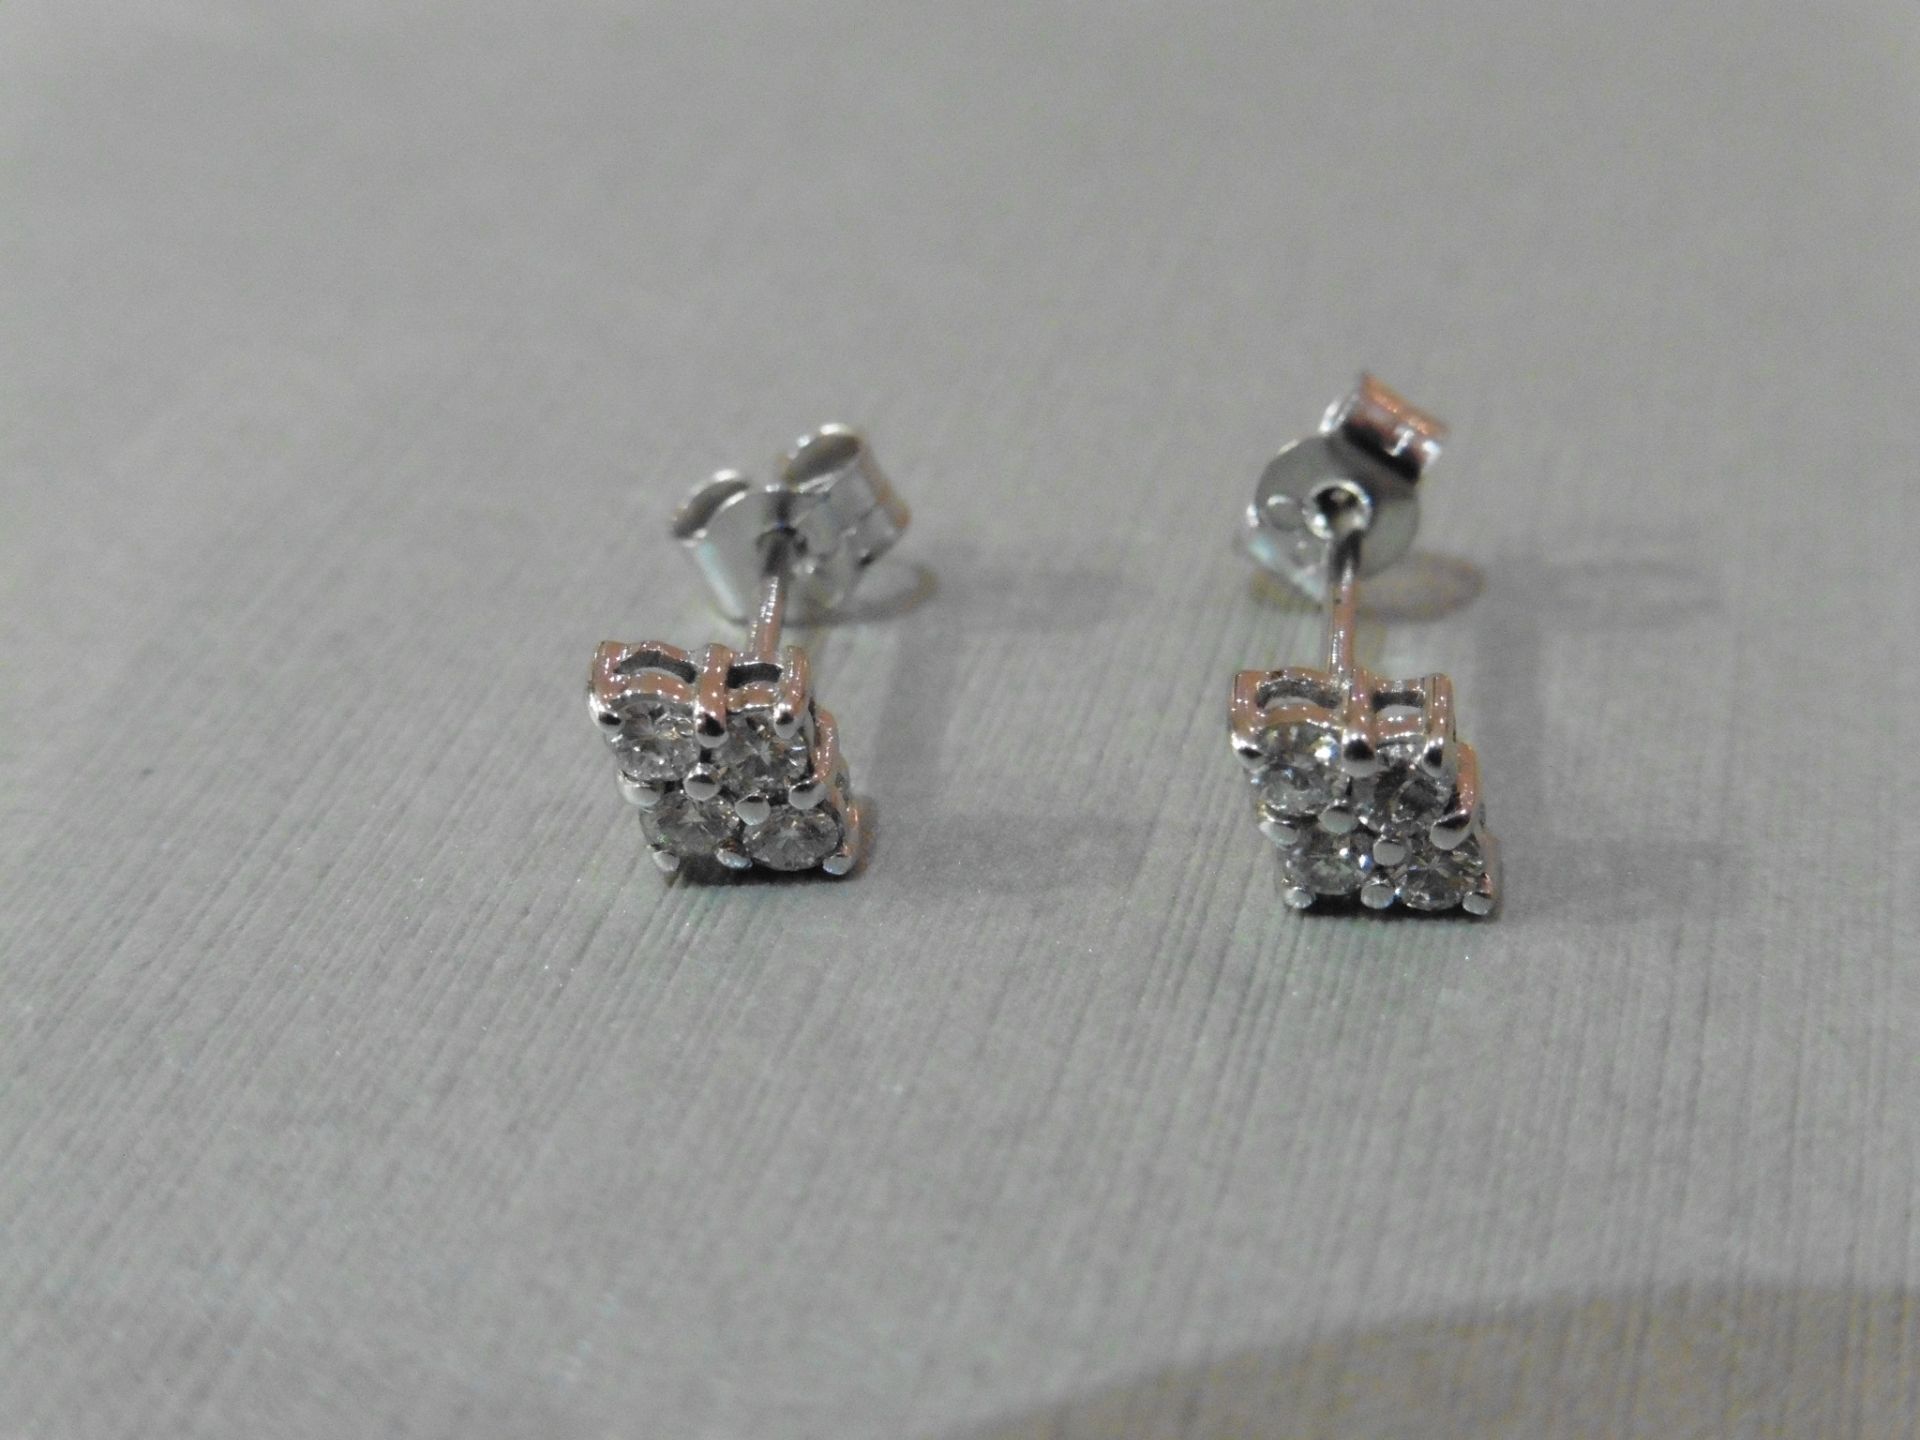 0.25ct diamond cluster style earrings each set with 4 small brilliant cut diamonds, H colour and Si2